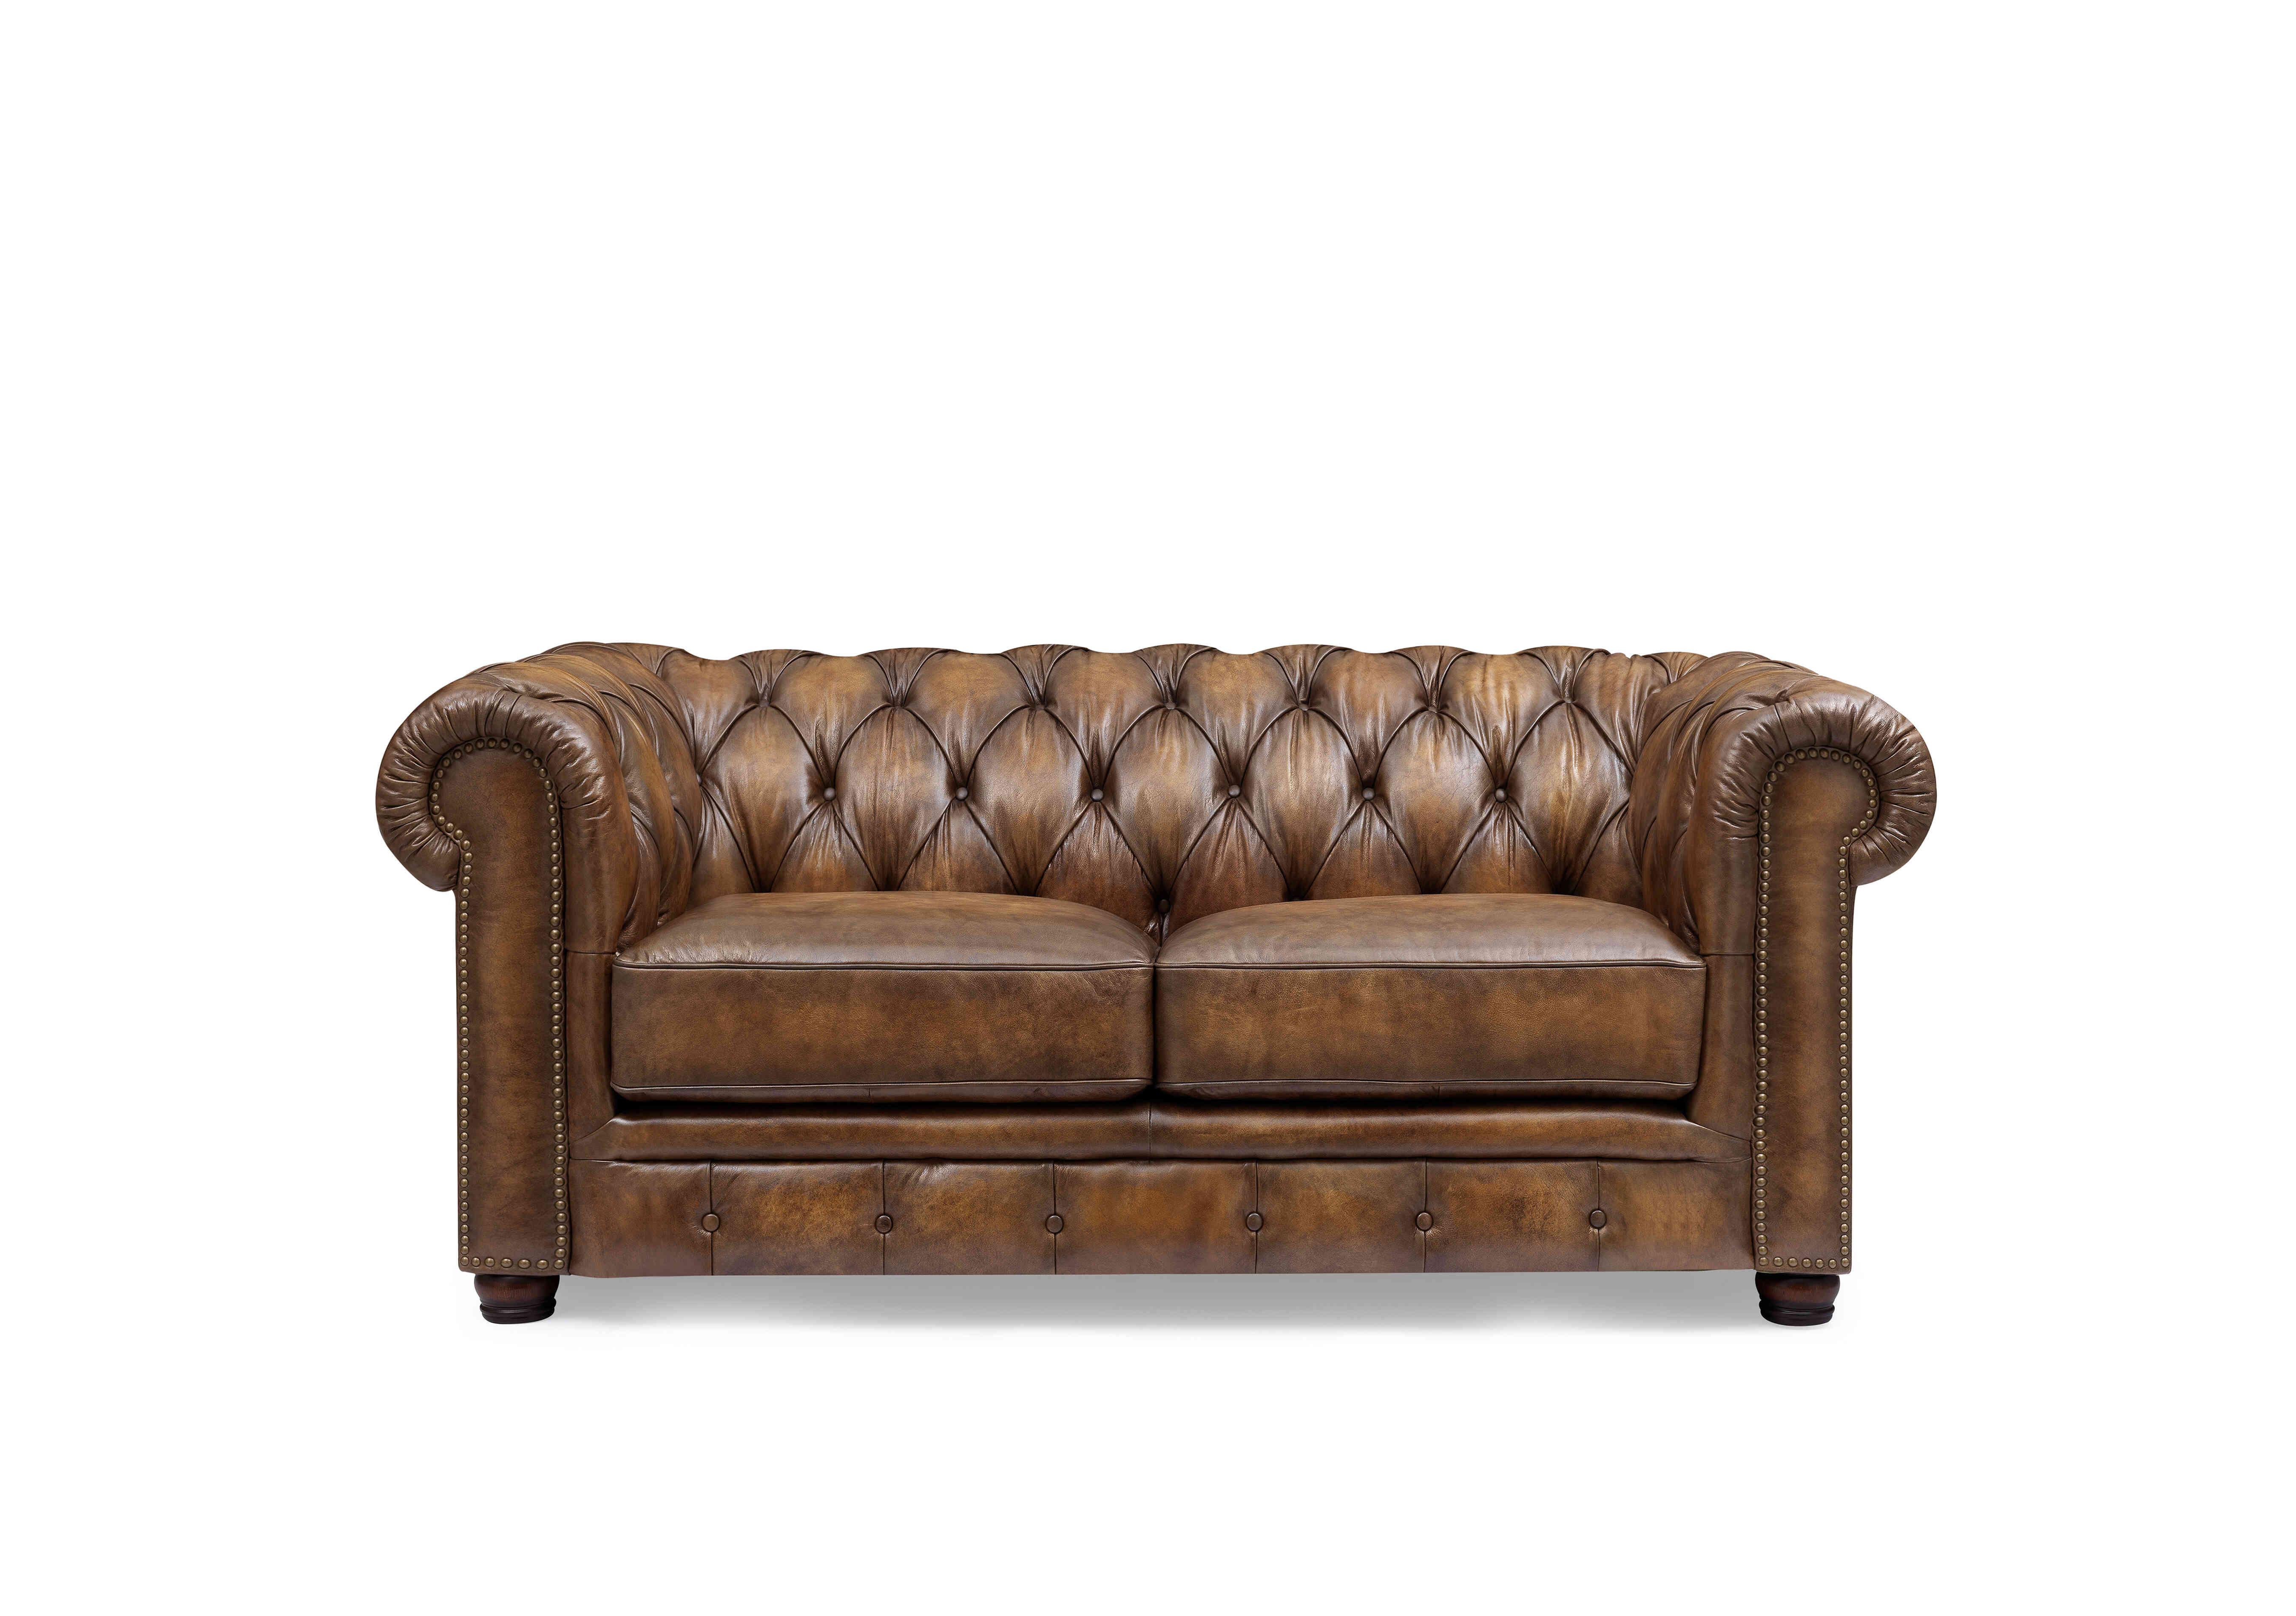 Shackleton 2 Seater Leather Chesterfield Sofa in X3y1-1981ls Saddle on Furniture Village